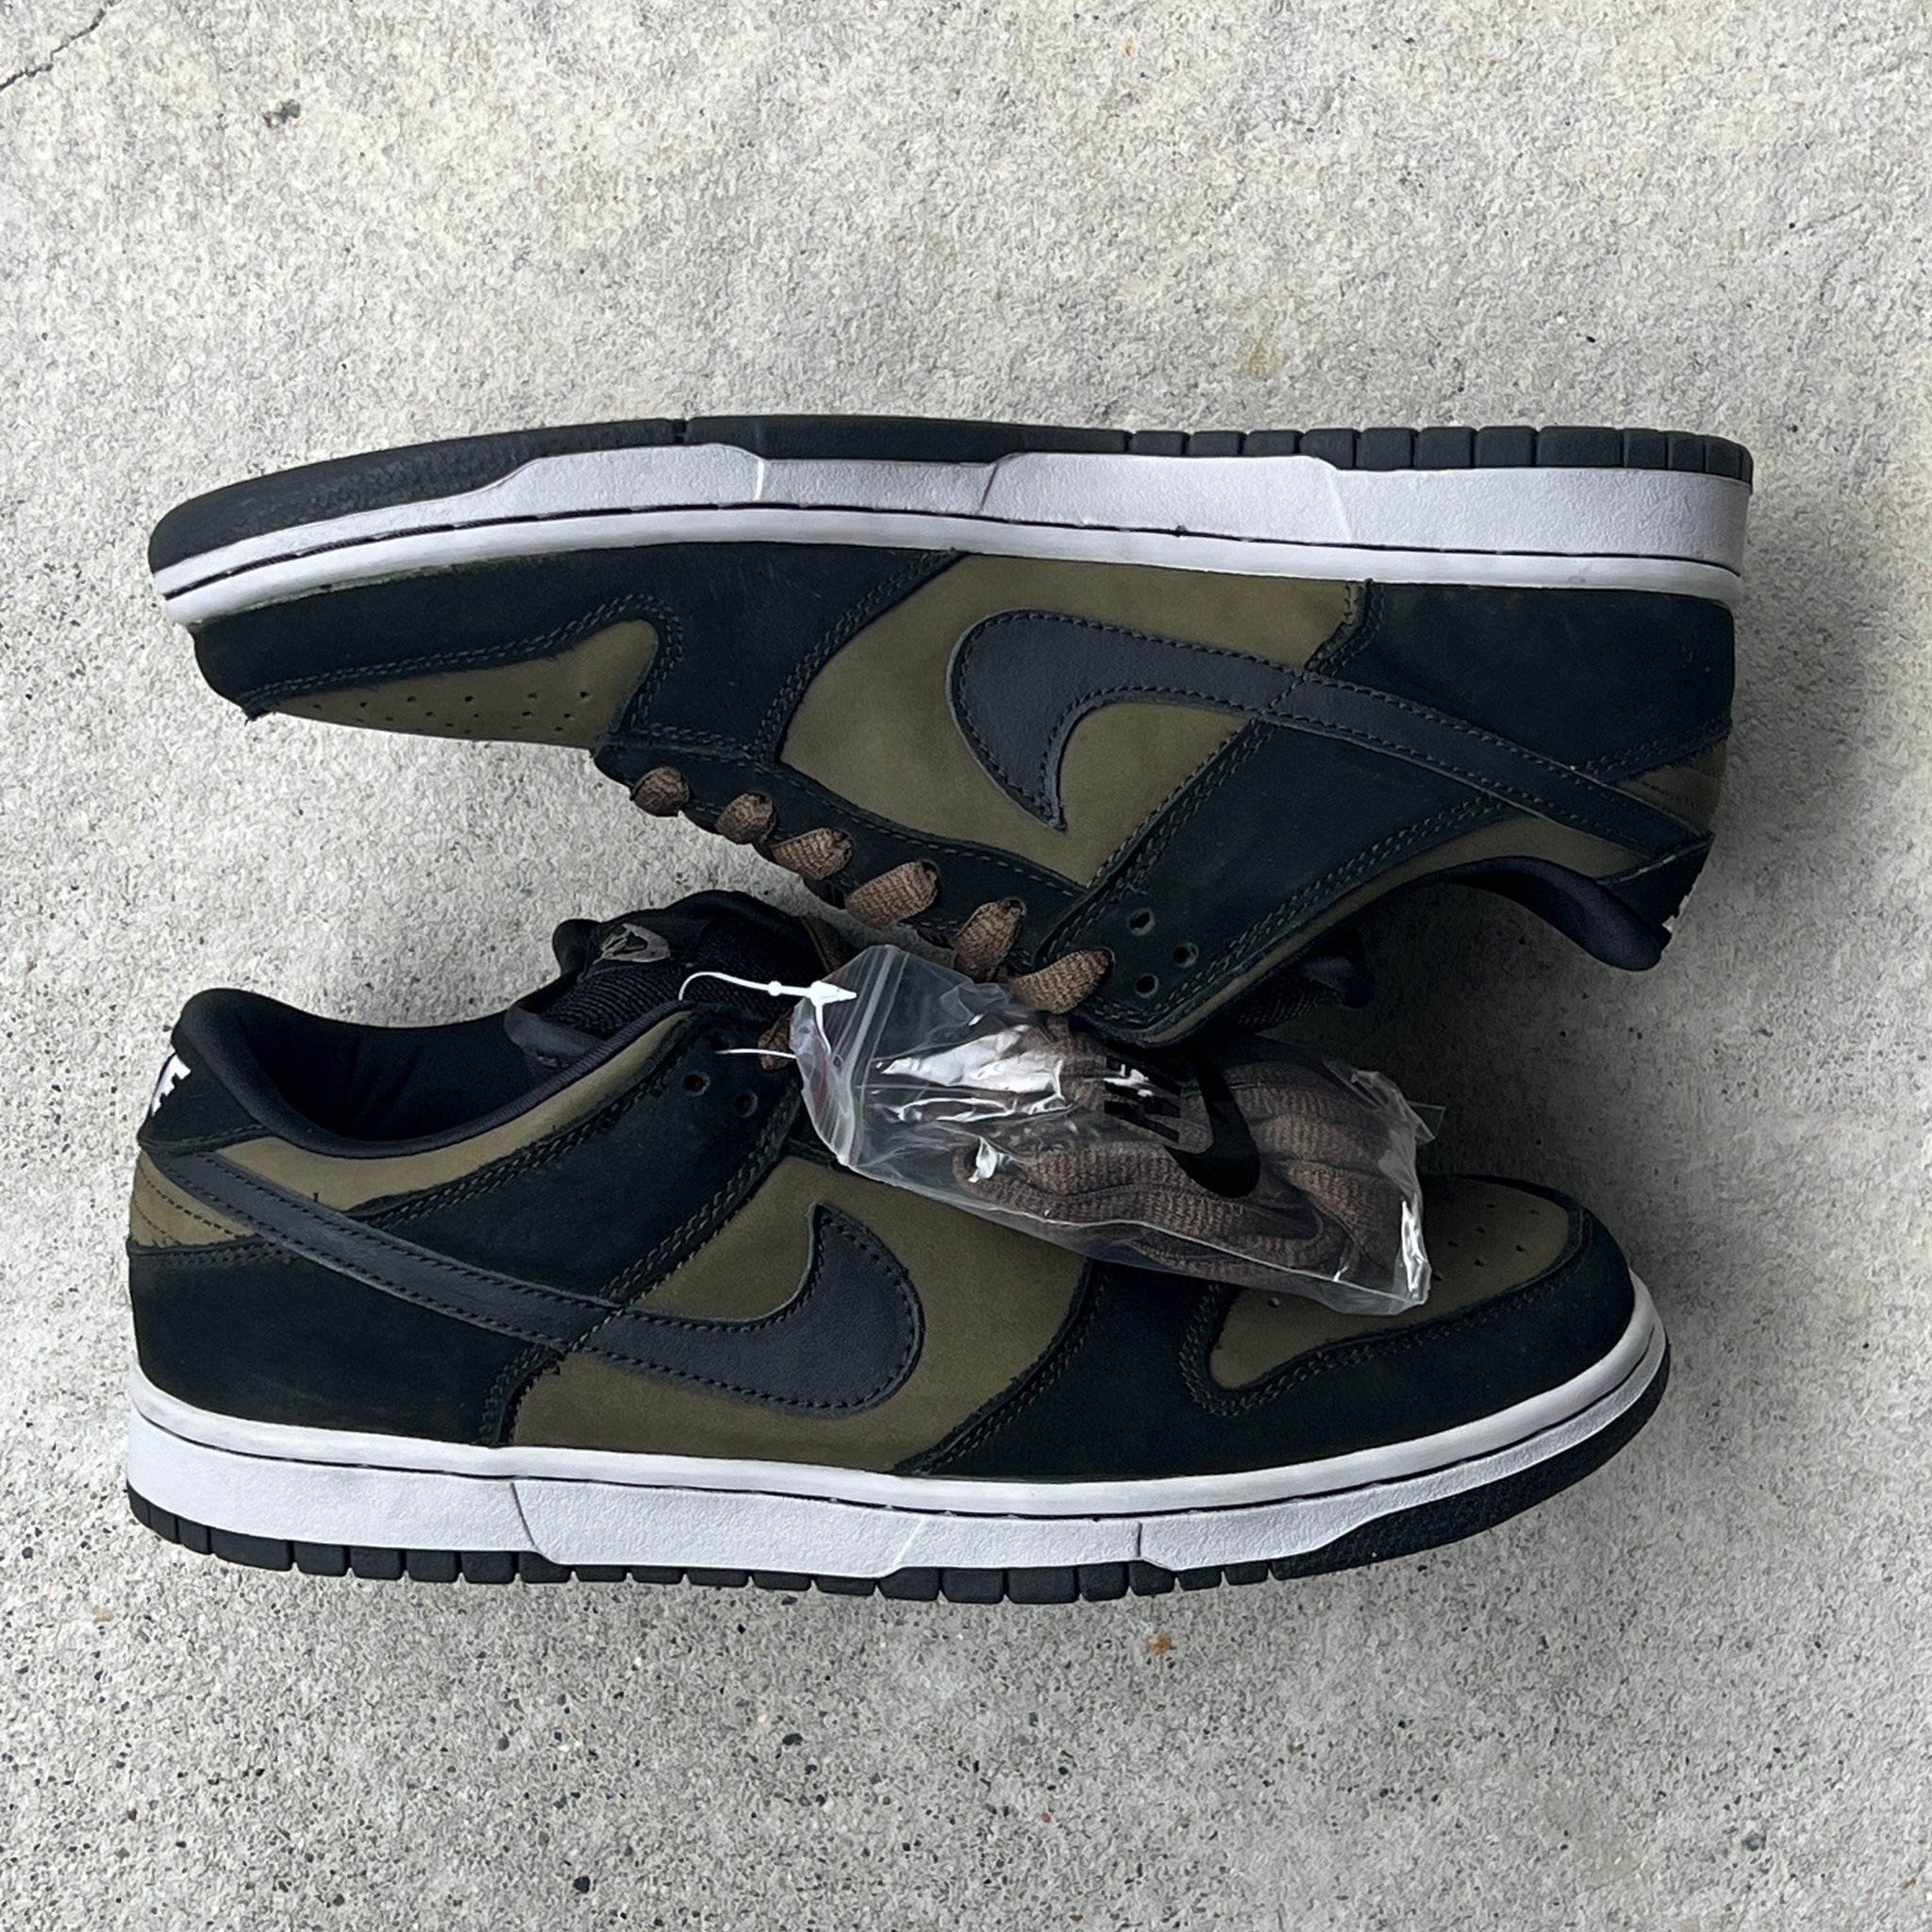 10.5 US - DS NIKE SB DUNK LOW LODEN W BOX 2002